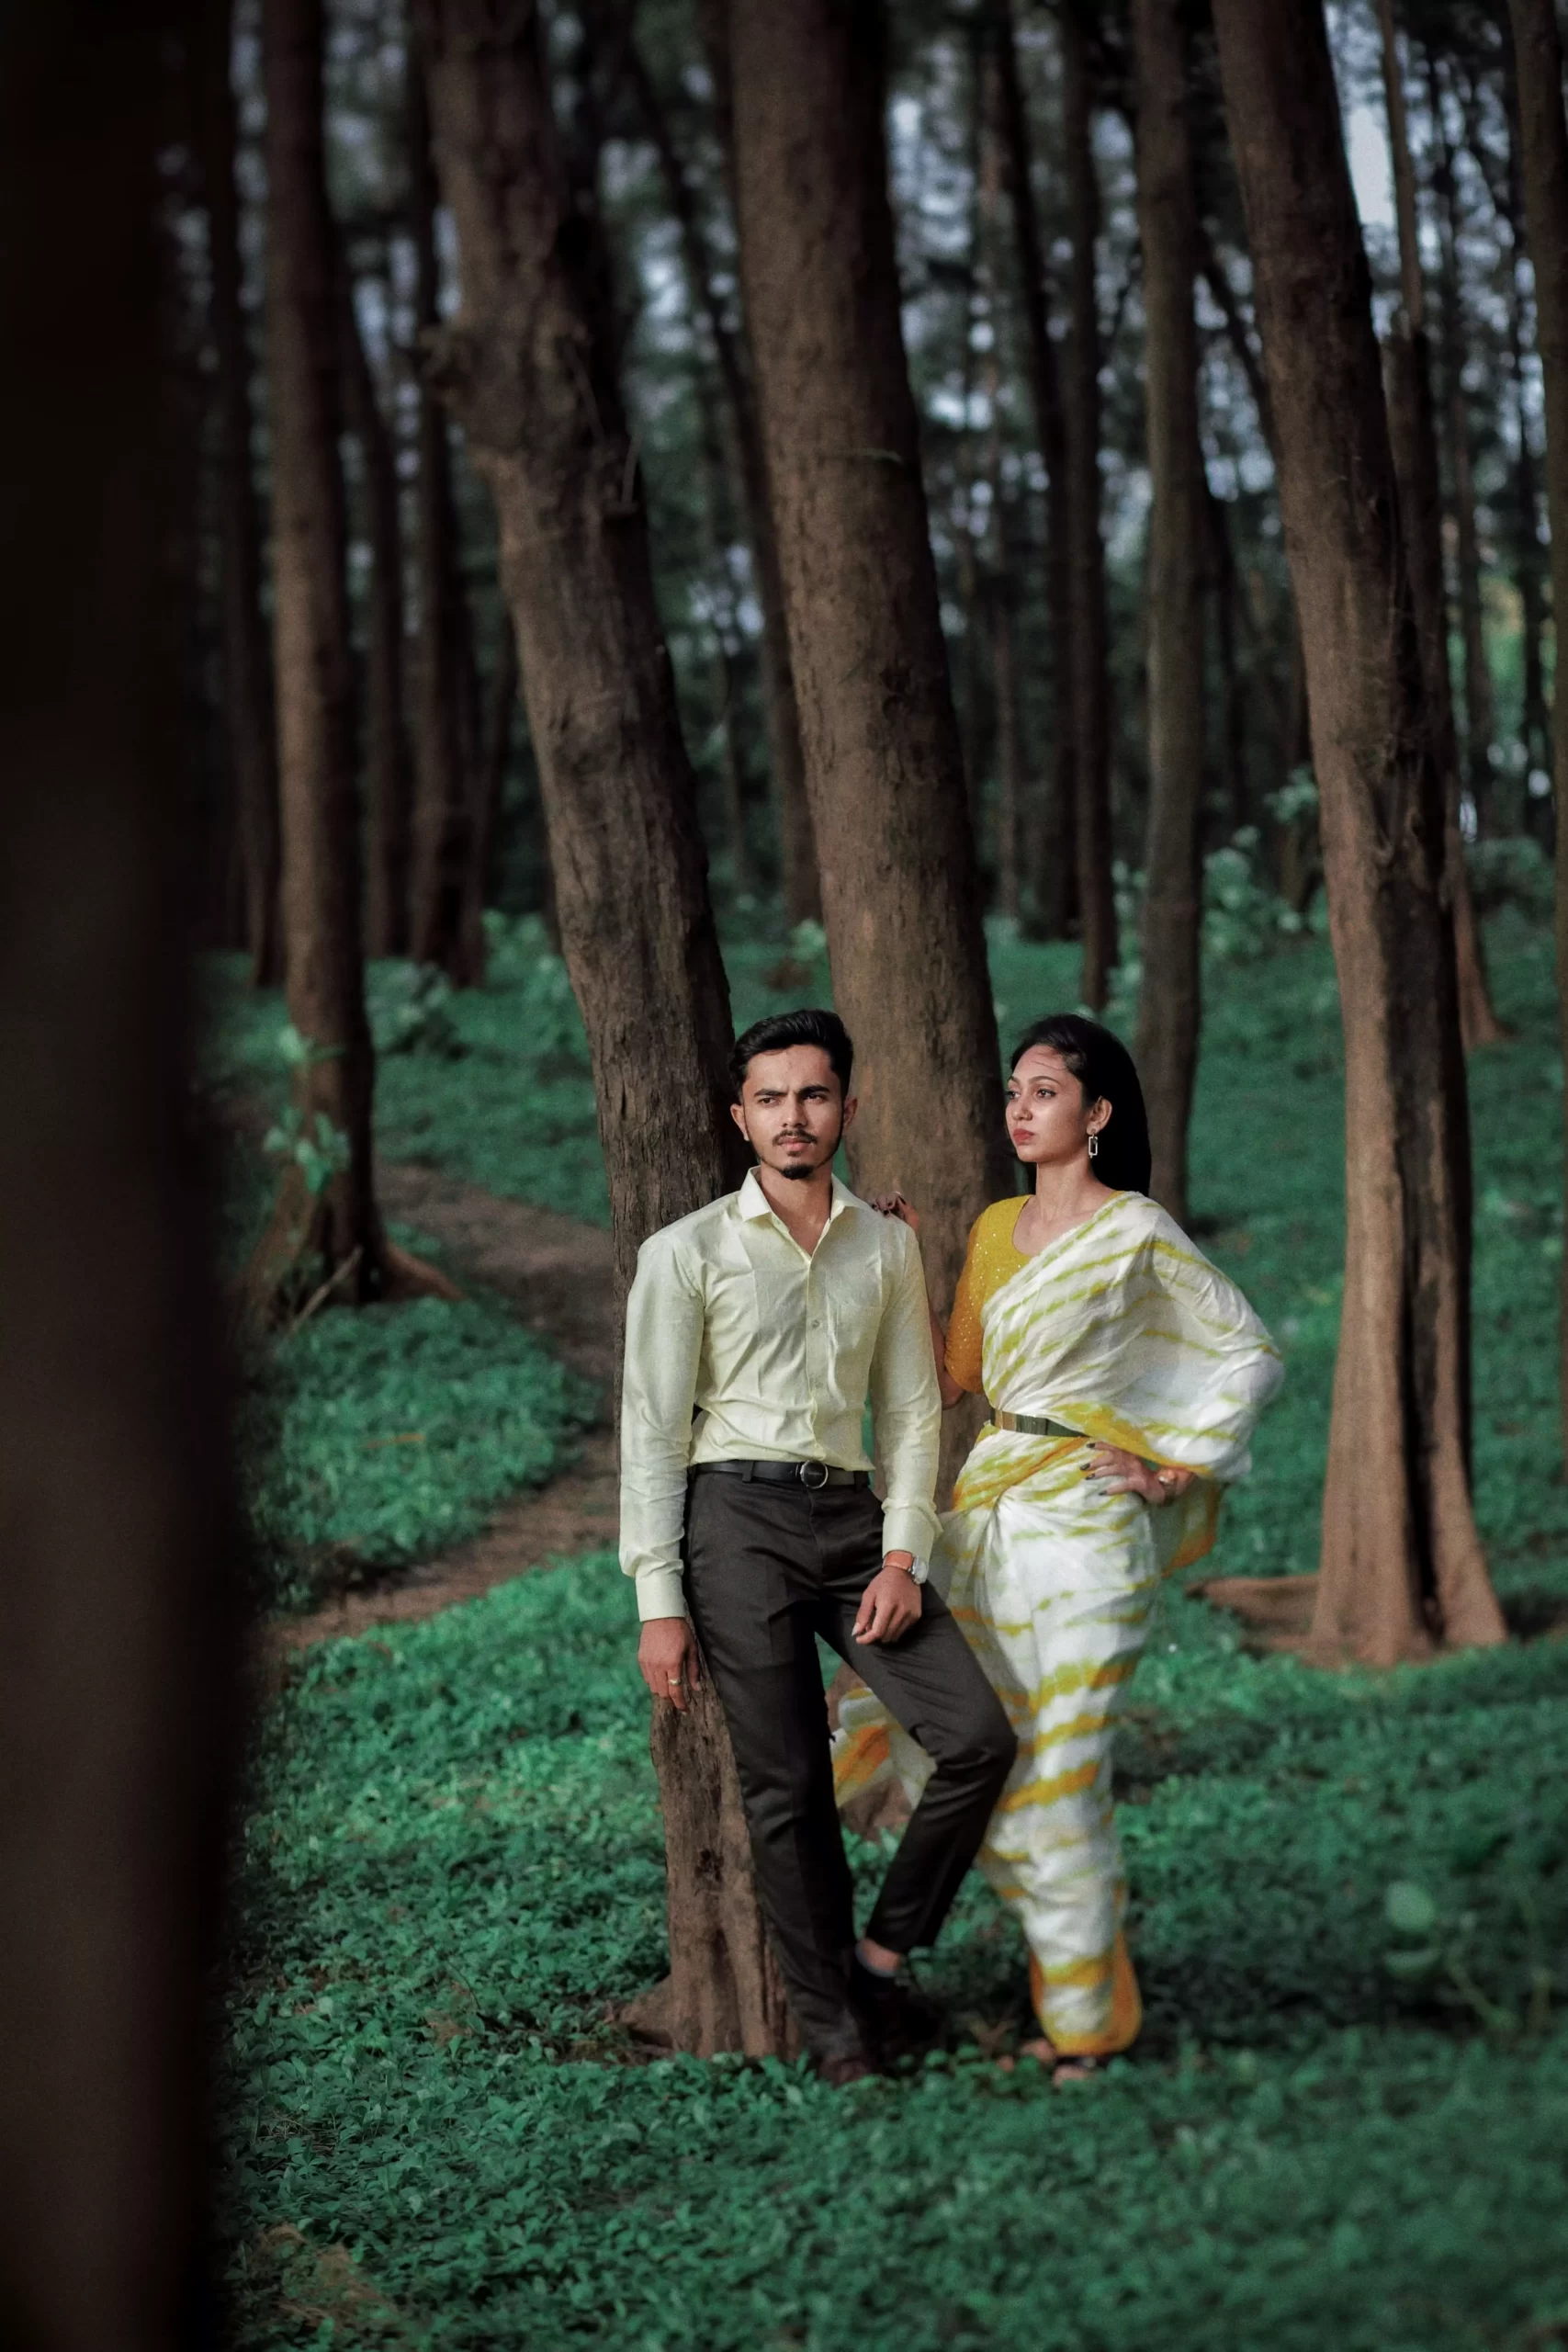 Prewedding Shoot Trail Gowns – Style Icon www.dressrent.in